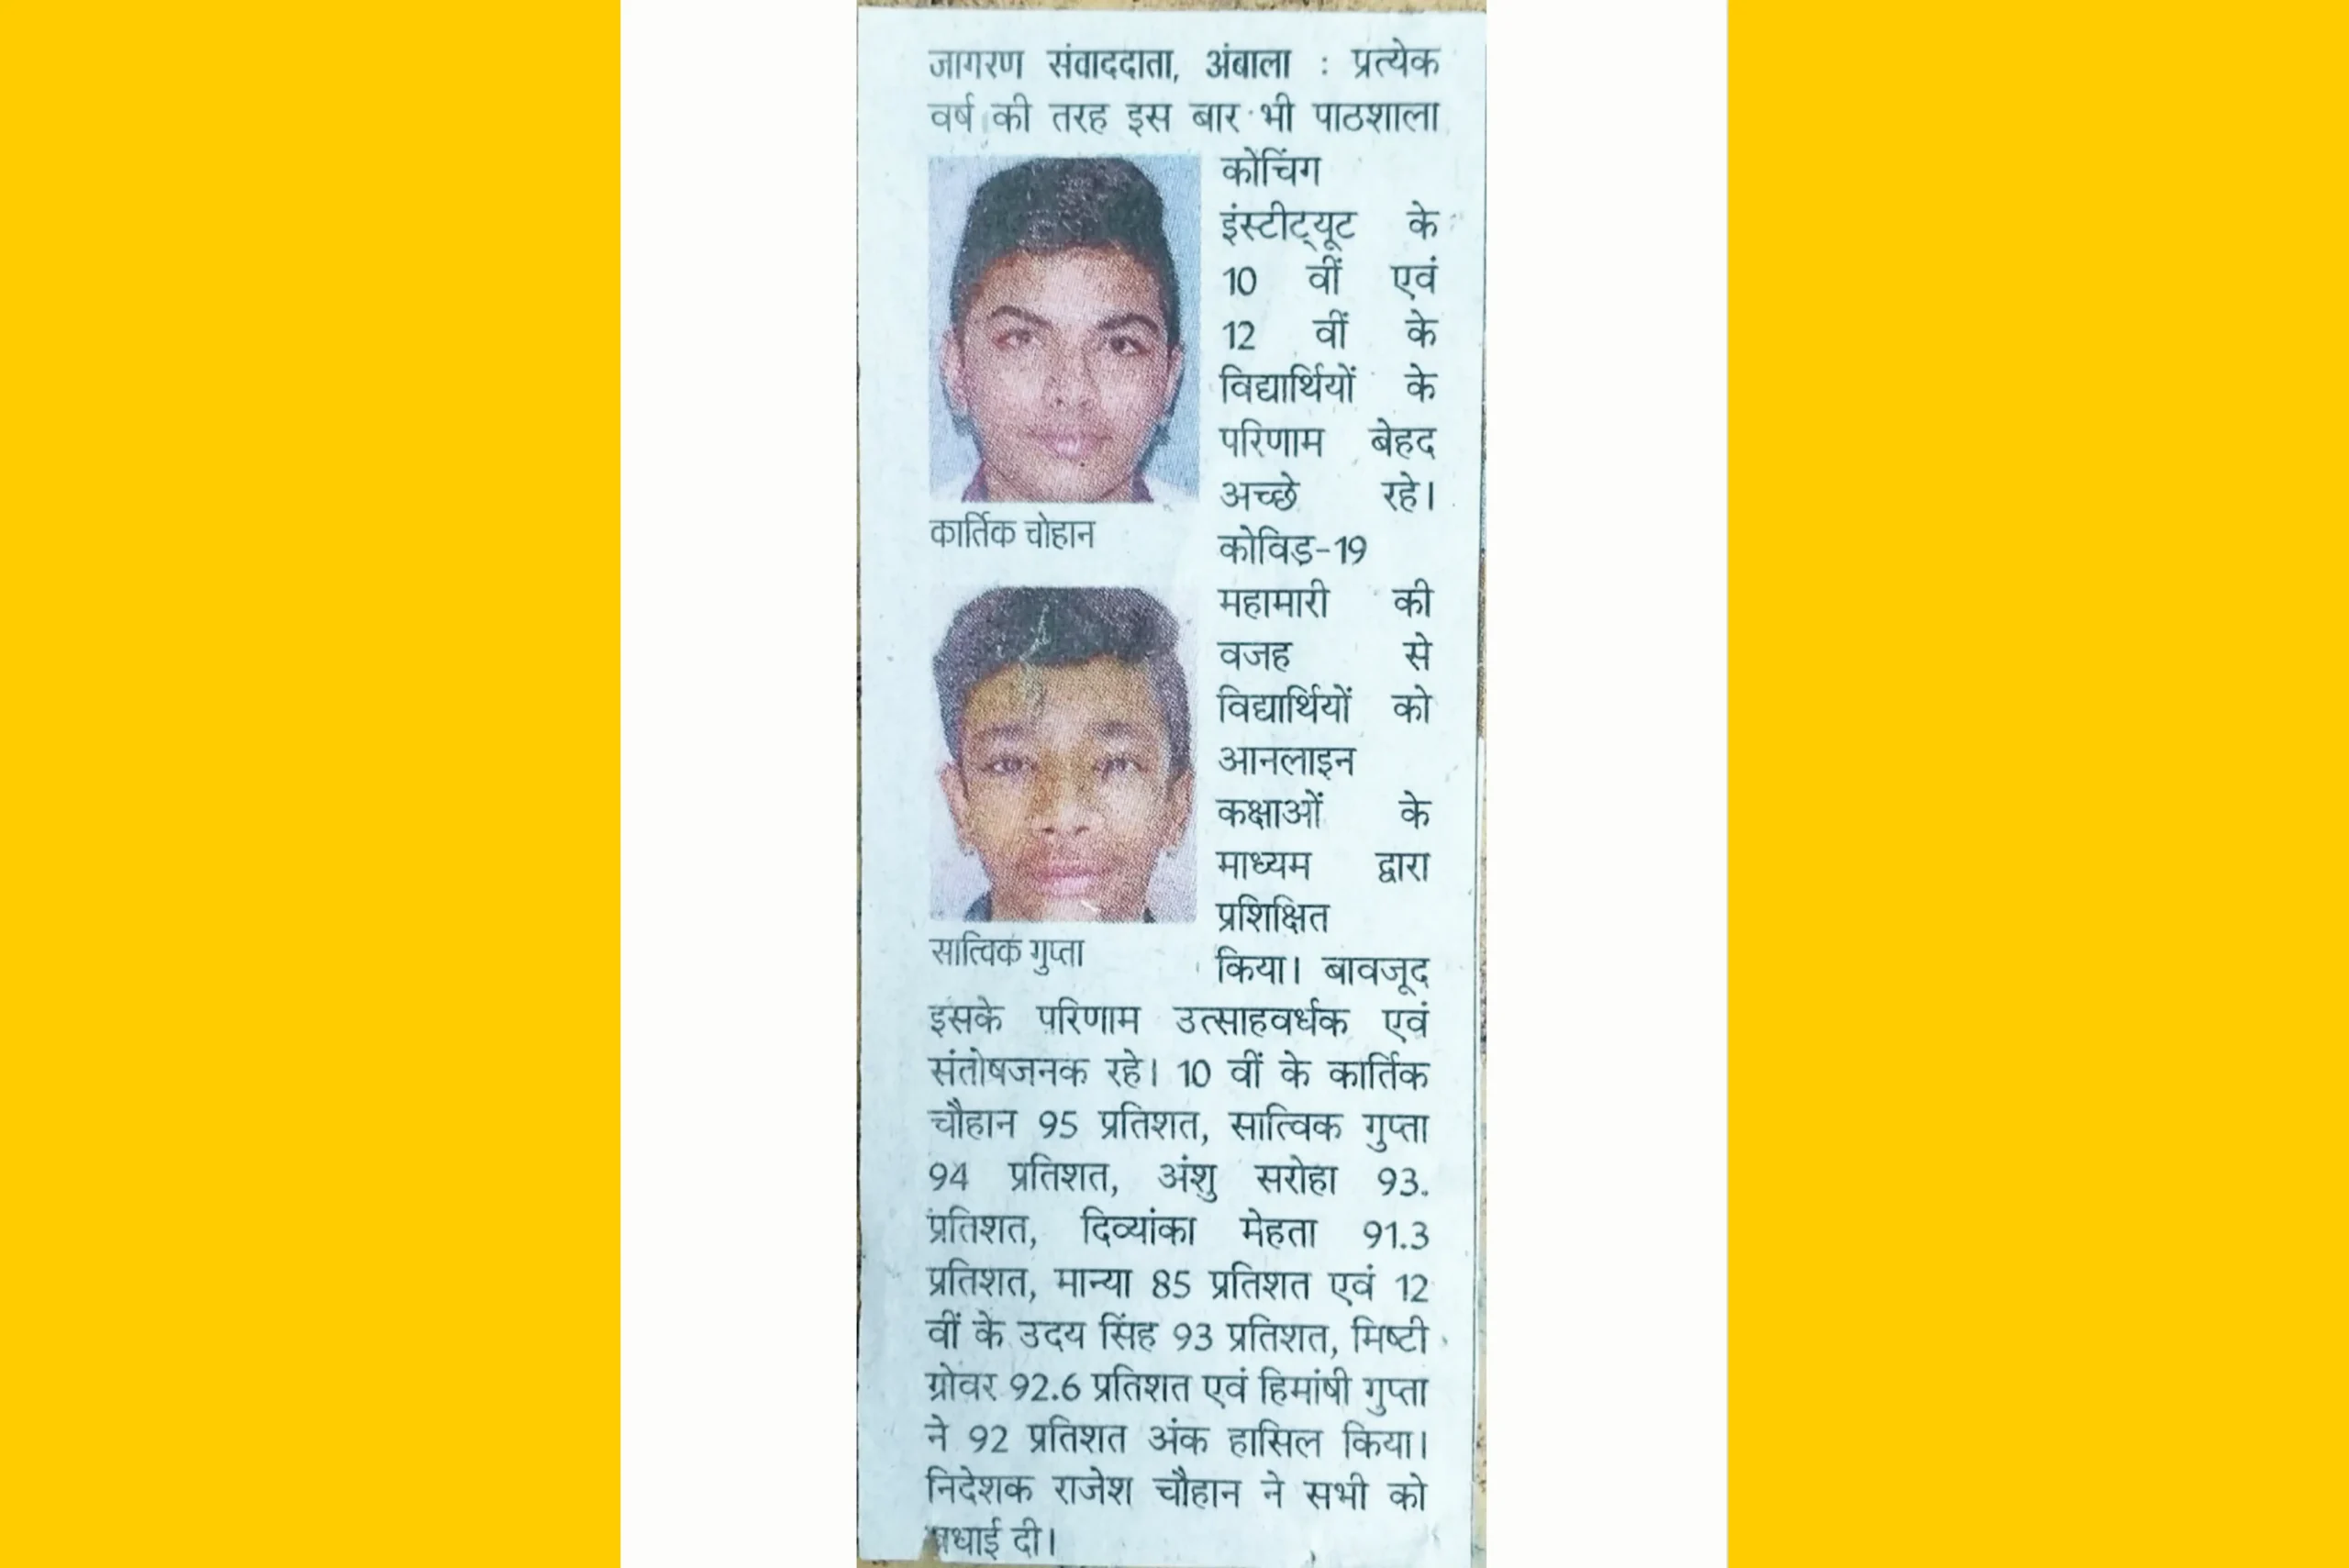 Paathshala Coaching results featured in newspaper 5